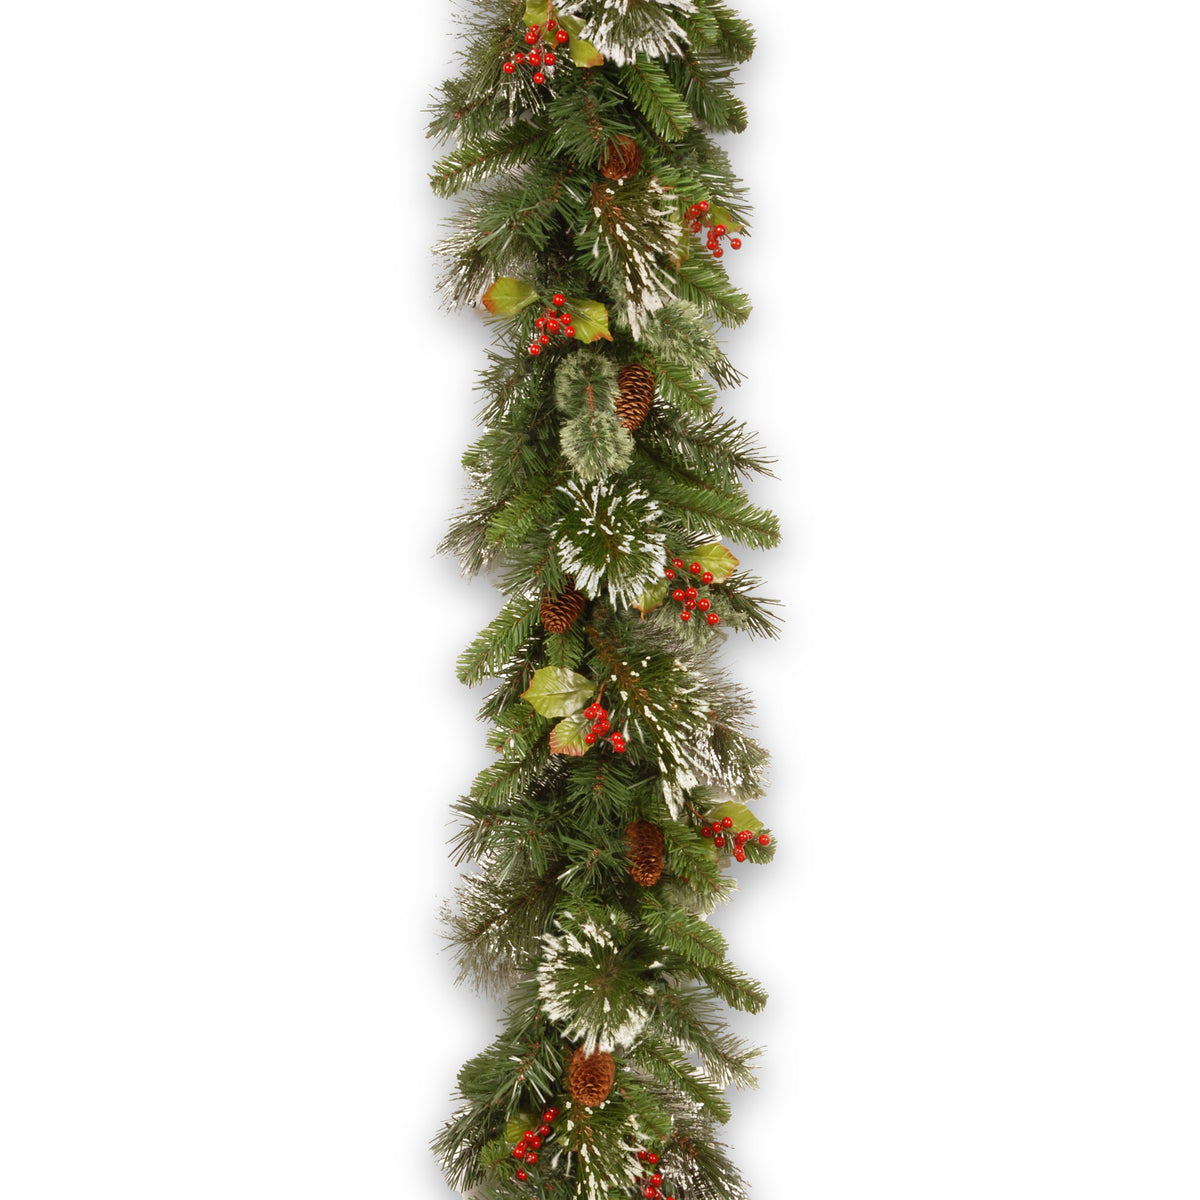 Wintry 9ft Garland with Cones, Red Berries & Snowflakes from Roseland